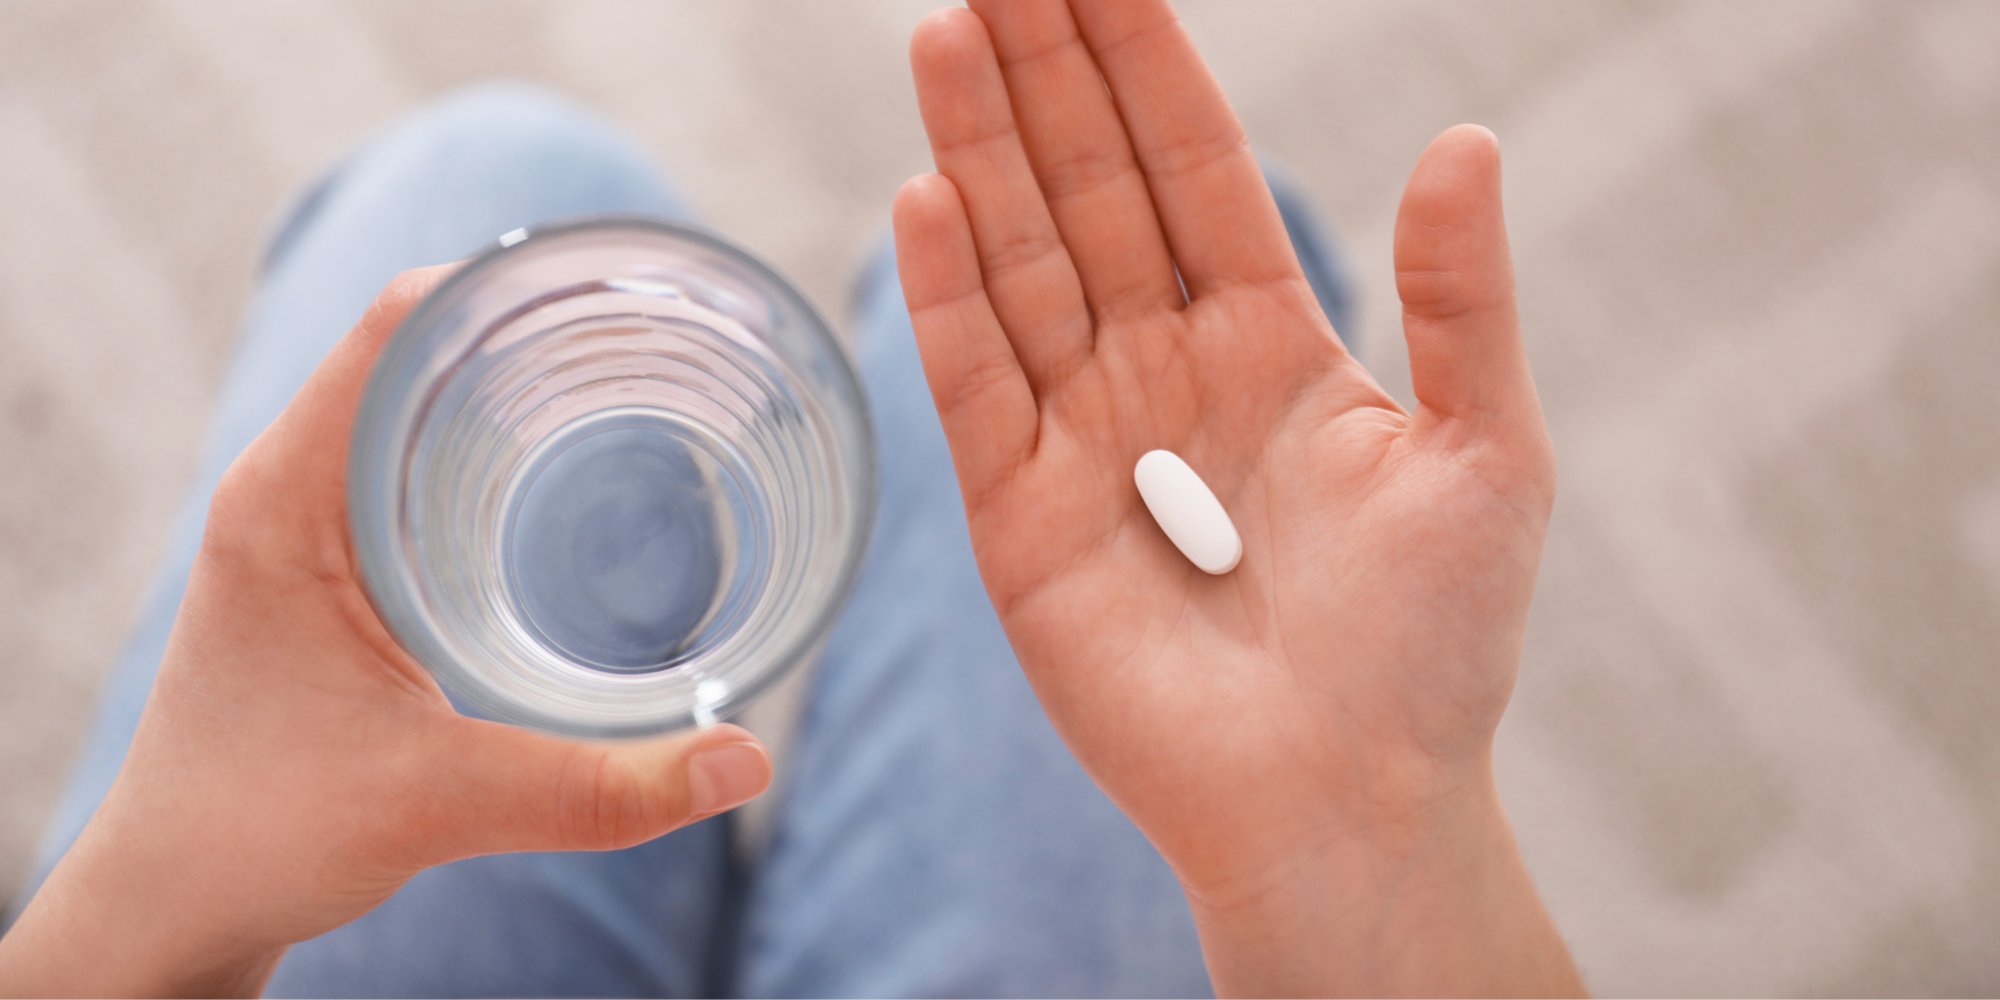 What is the Abortion Pill?